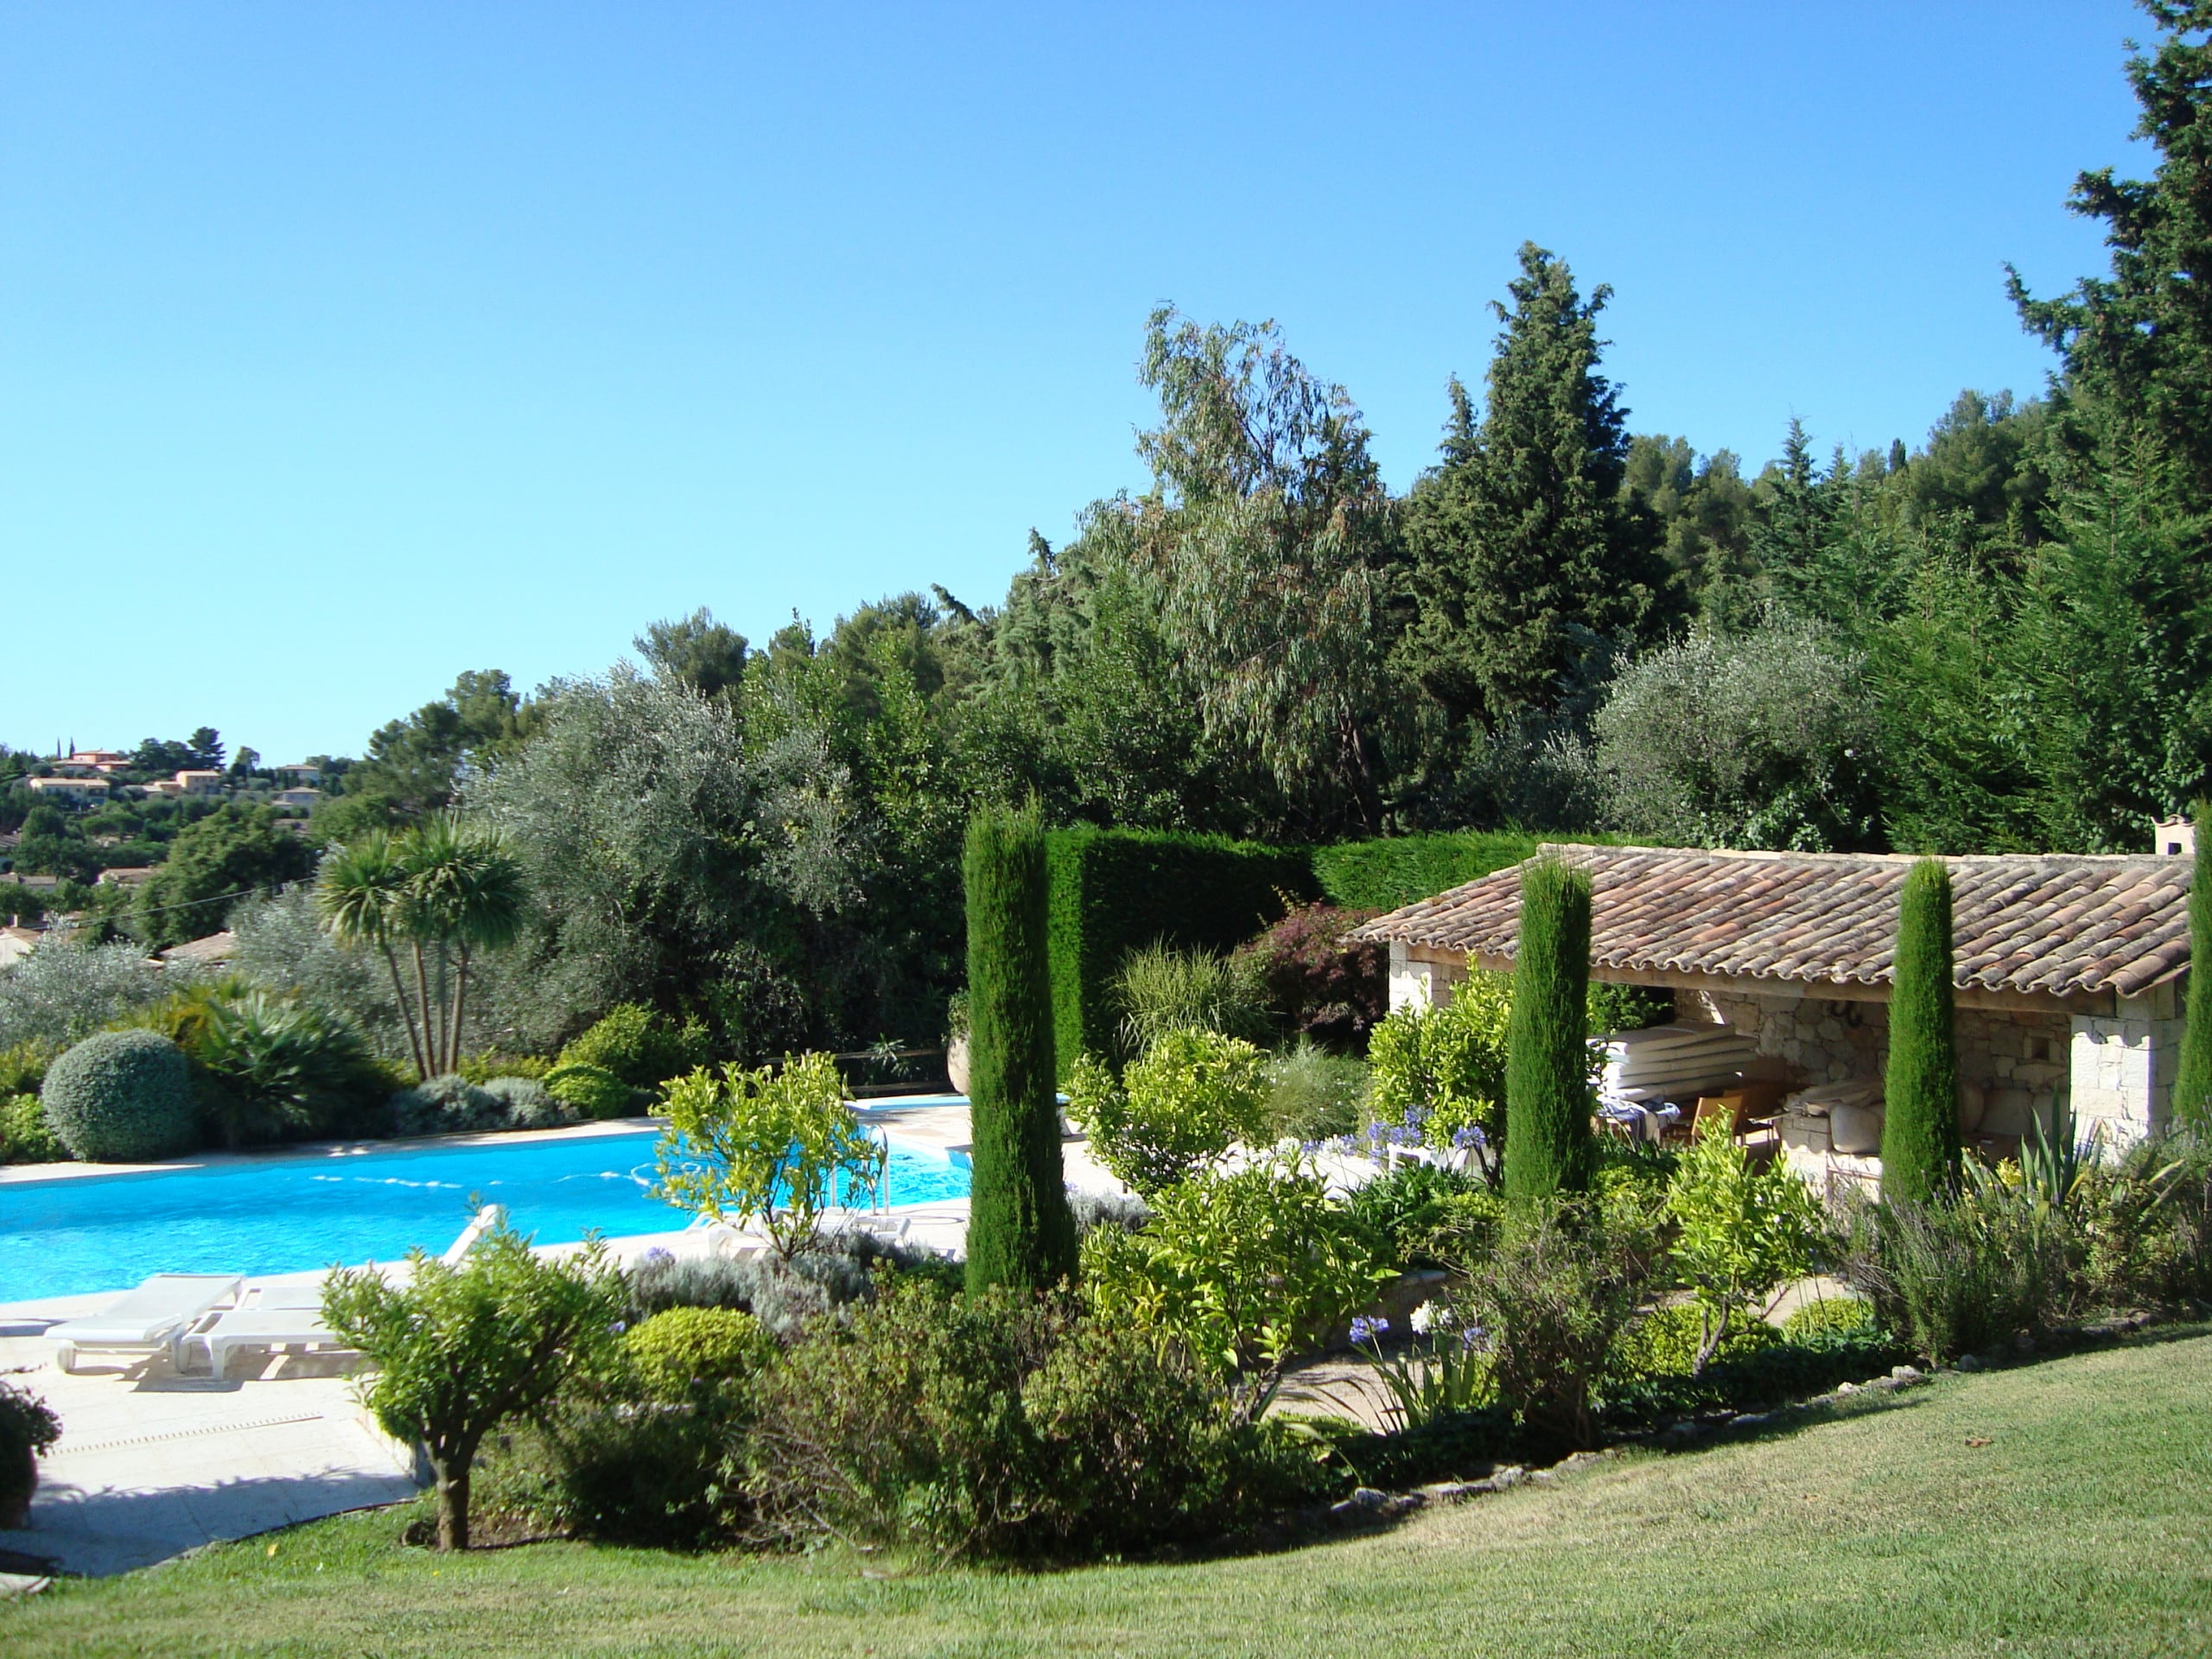 Property Image 2 - Exceptional property with 6 bedrooms, heated pool and tennis court surrounded by ancient olive grove